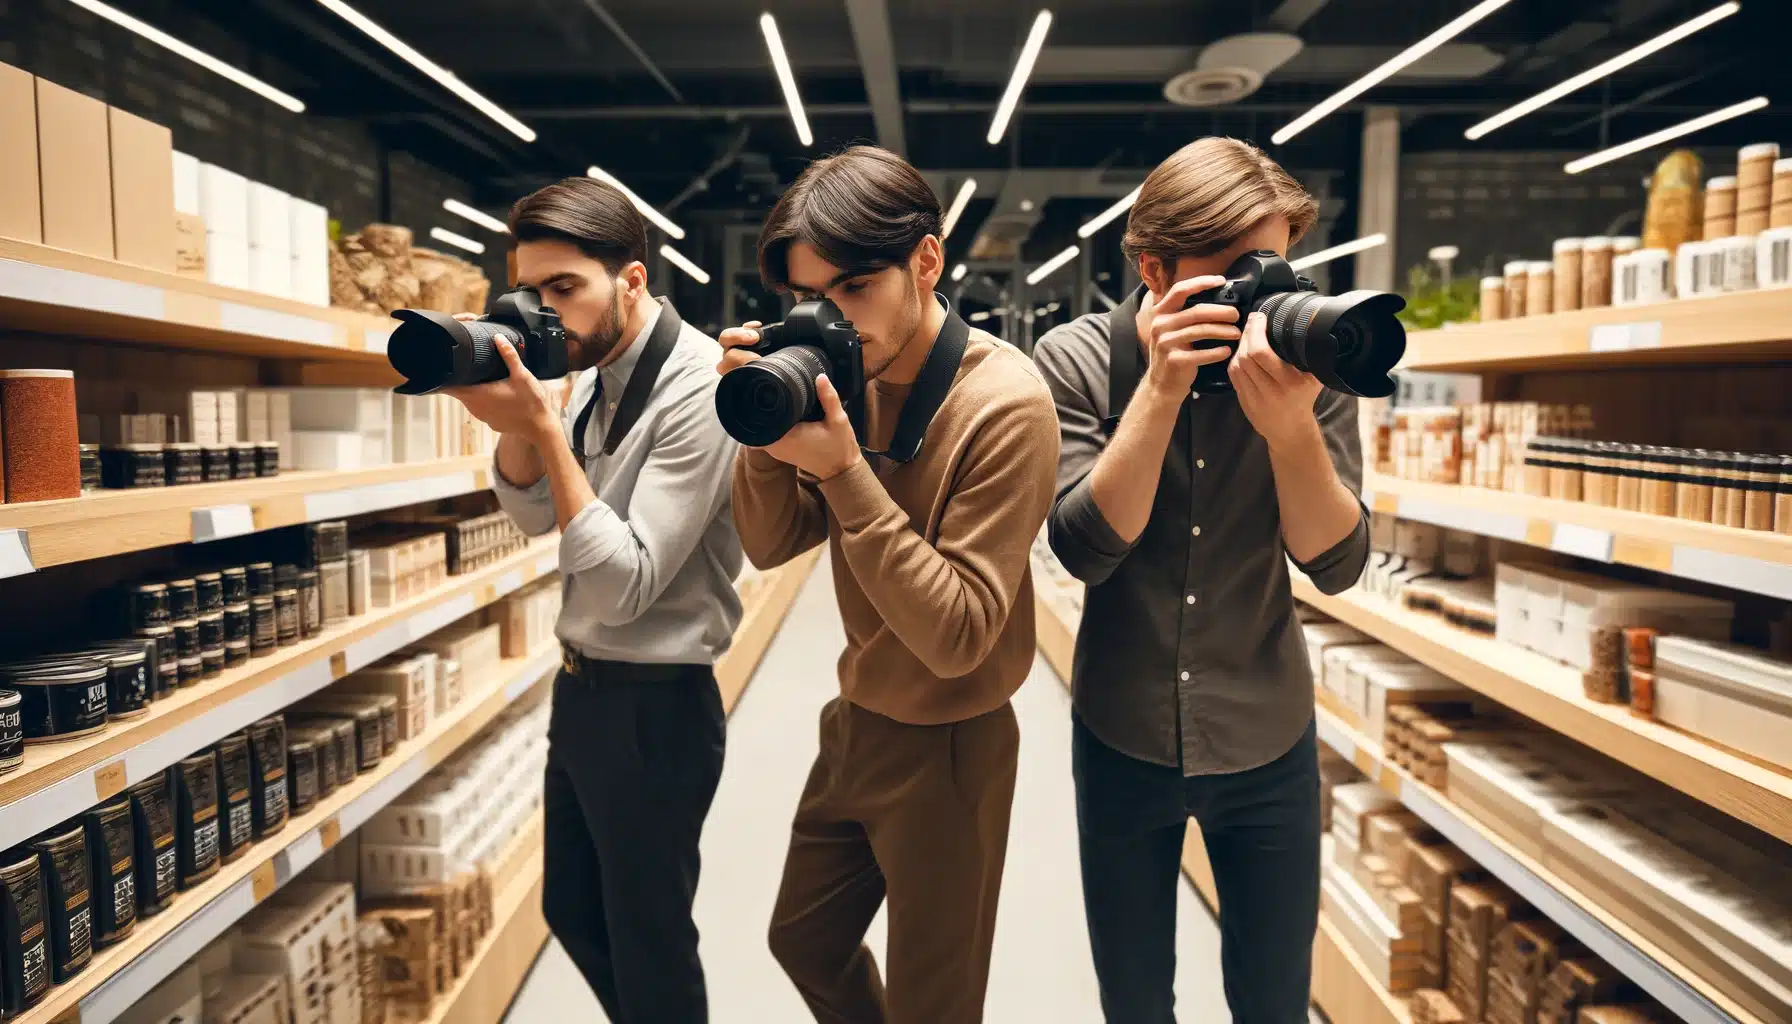 Three photographers capturing images in a well-lit retail store, using professional cameras and equipment. Various products are displayed on shelves.